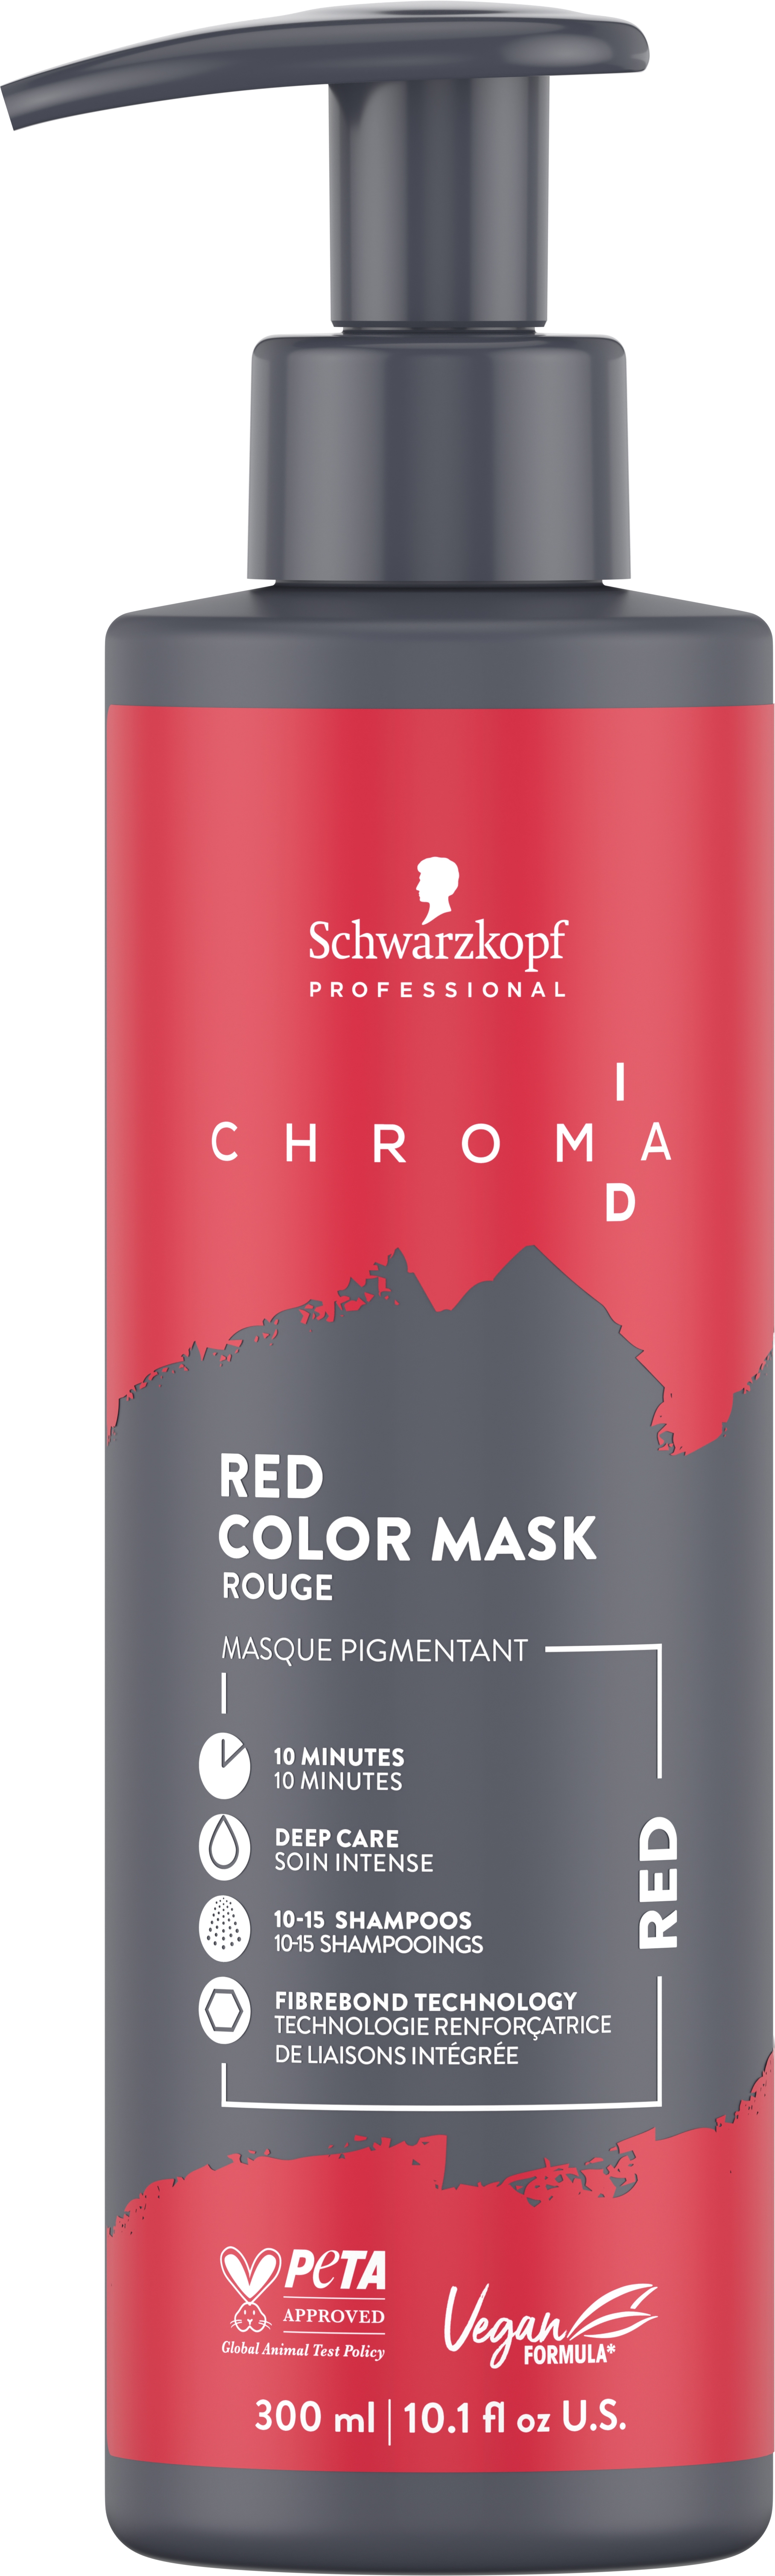 Product image from Chroma ID - Bonding Color Mask Red